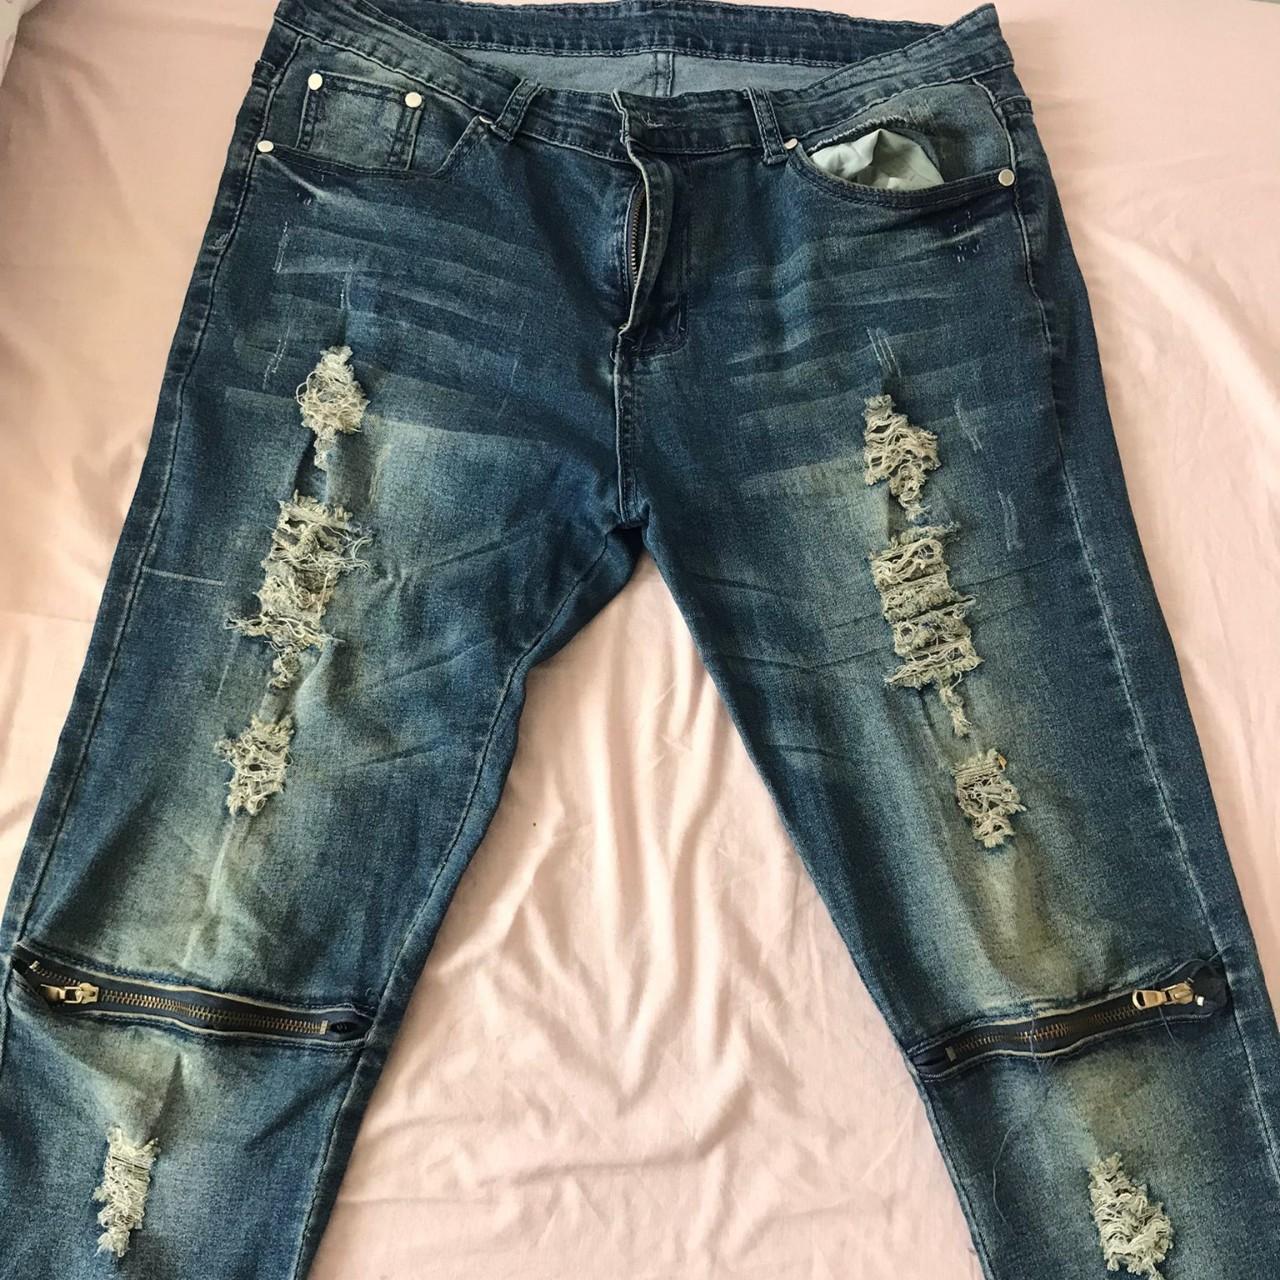 Blue Denim Ripped Jeans Condition - 7/10 Worn (too... - Depop